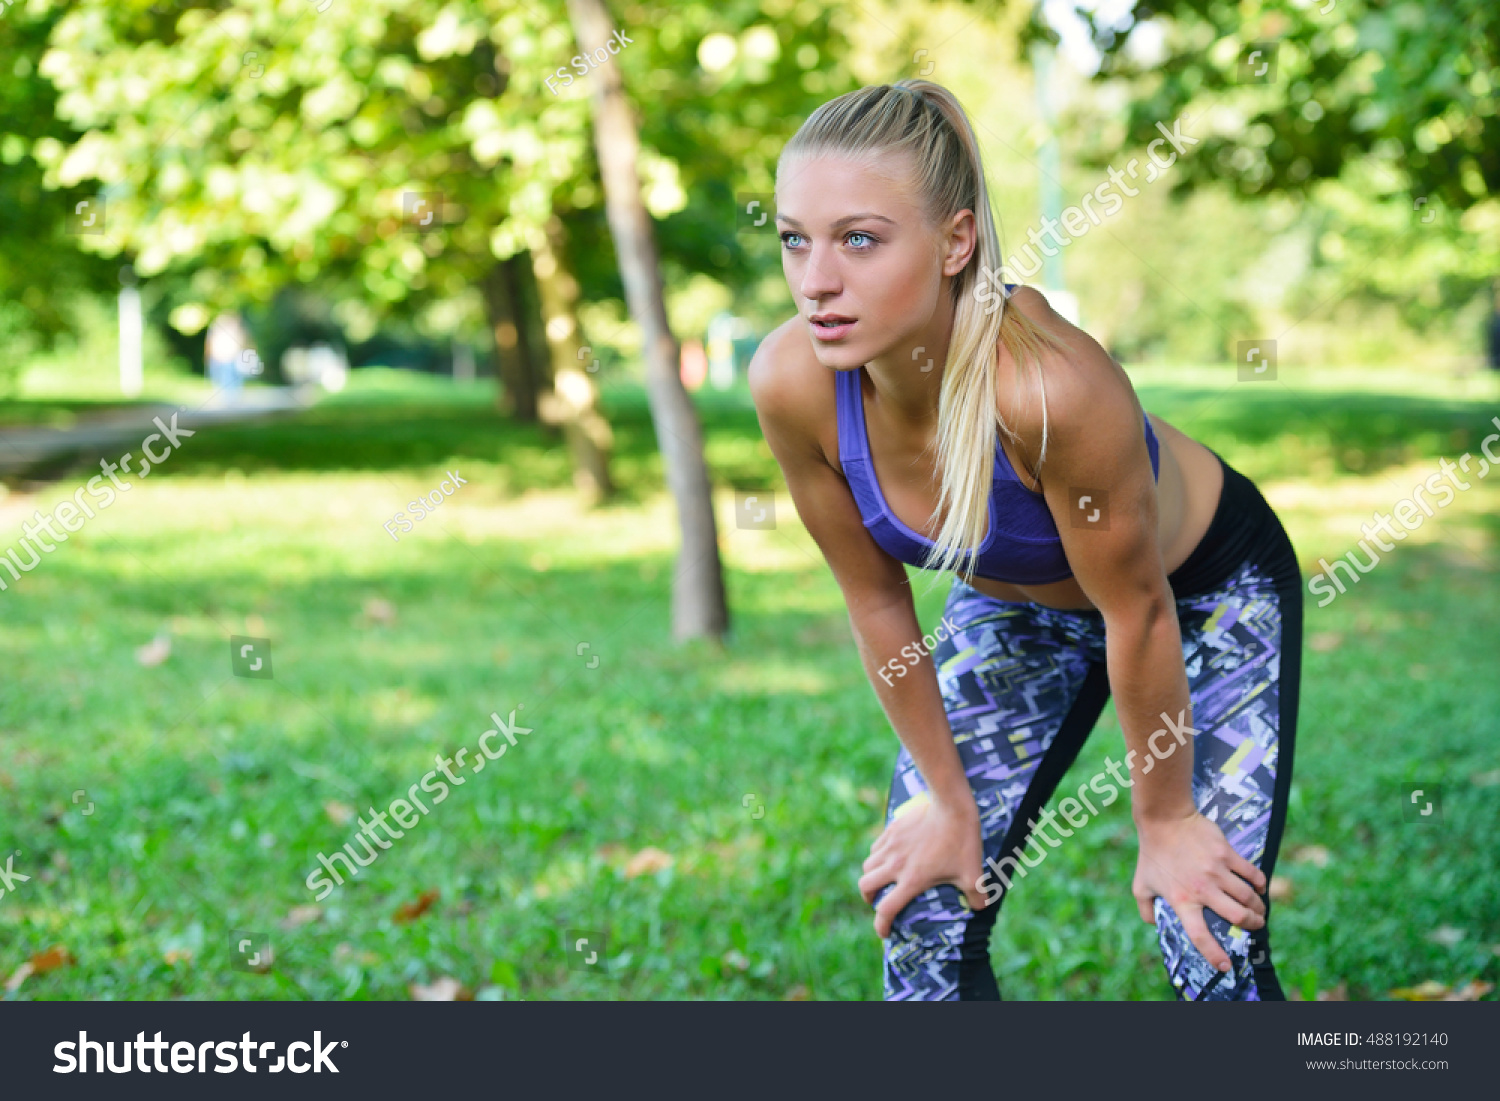 Young Woman Standing Bent Over Catching pic